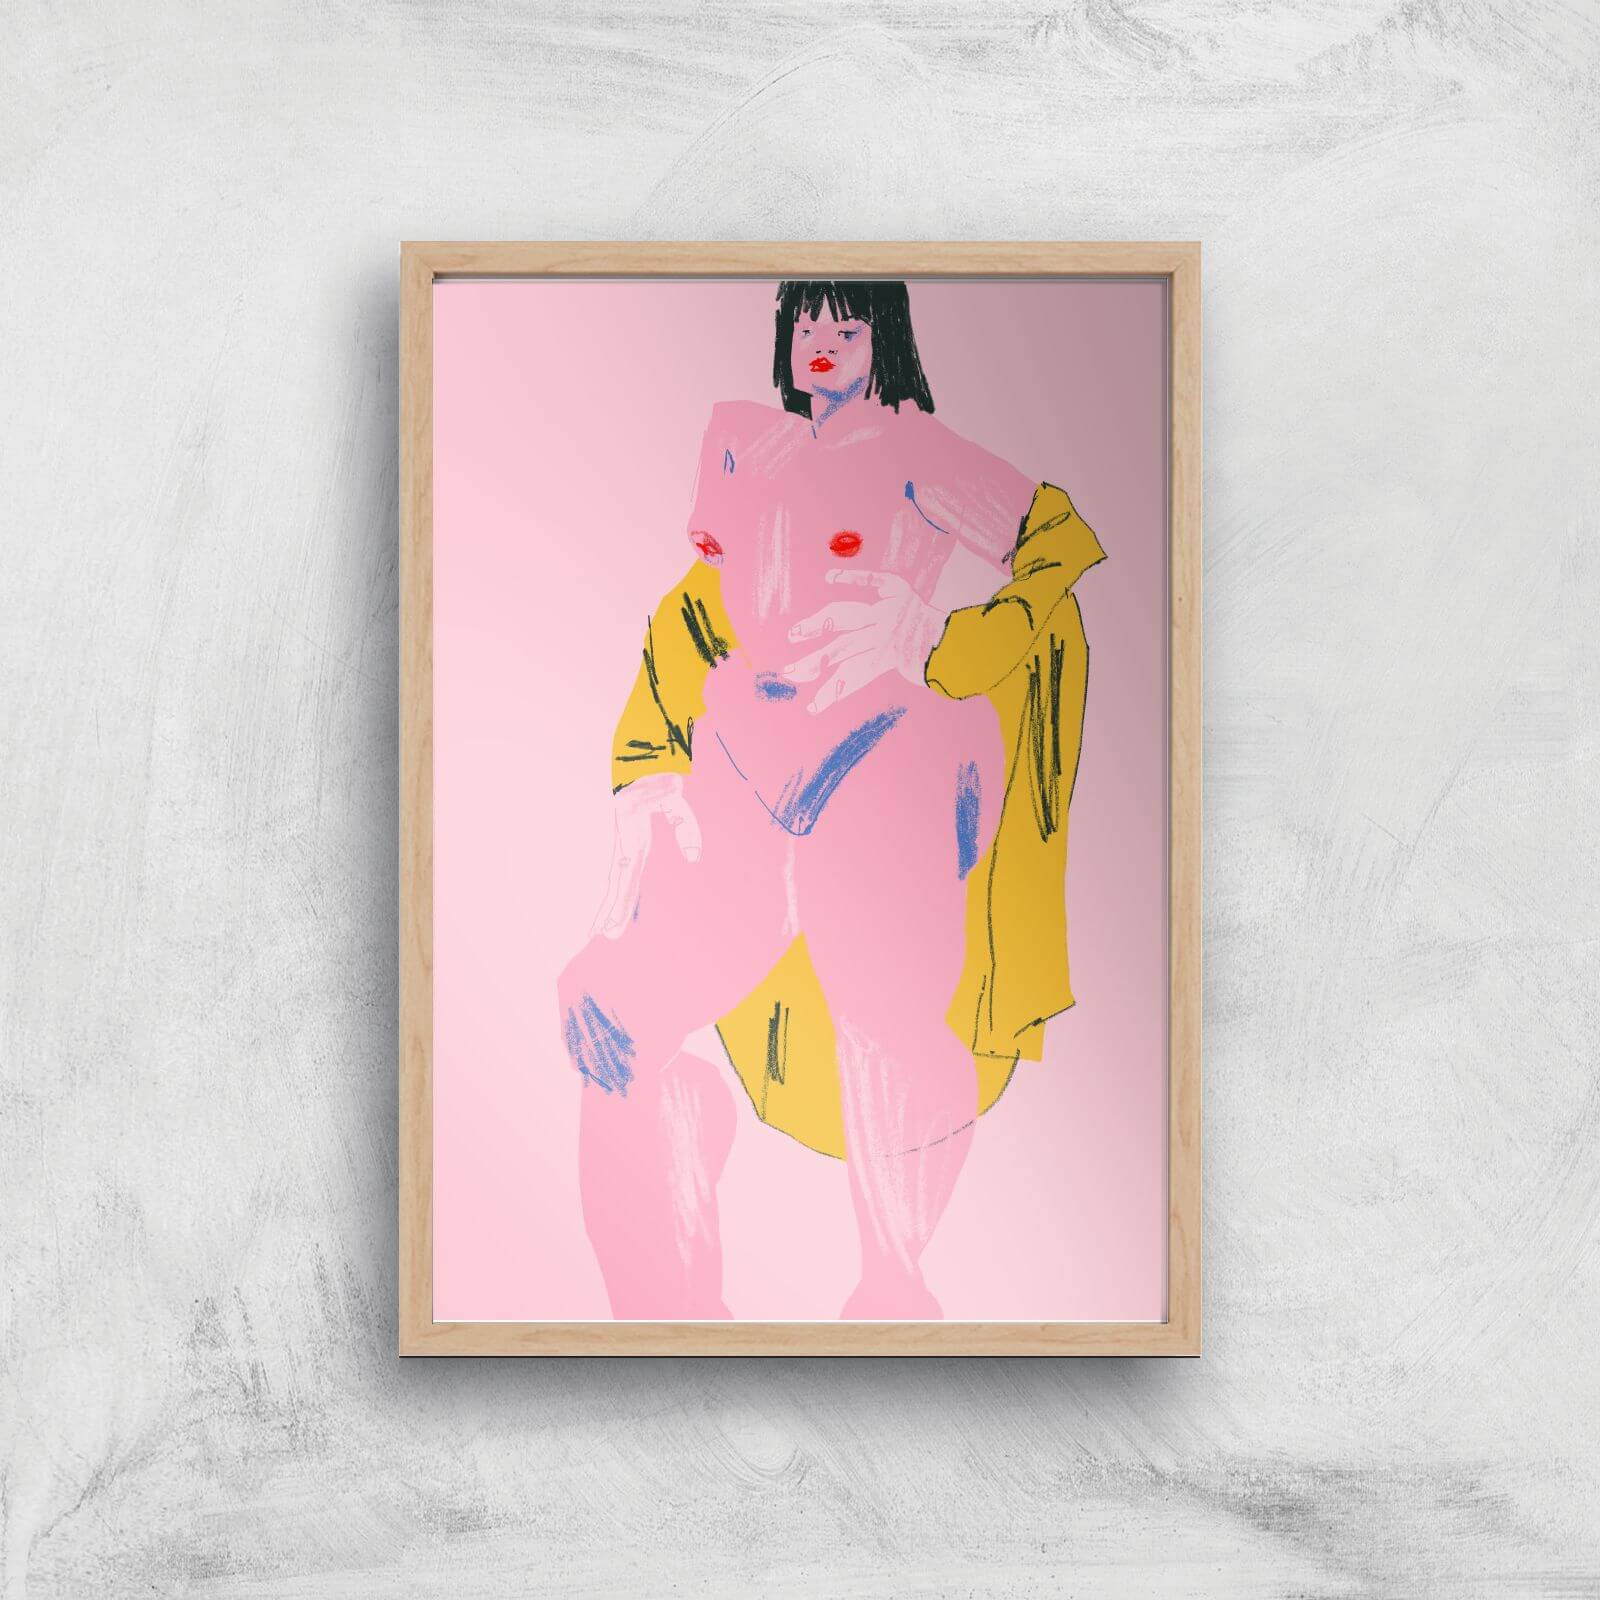 Pink & Yellow Nude Giclee Art Print - A3 - Wooden Frame